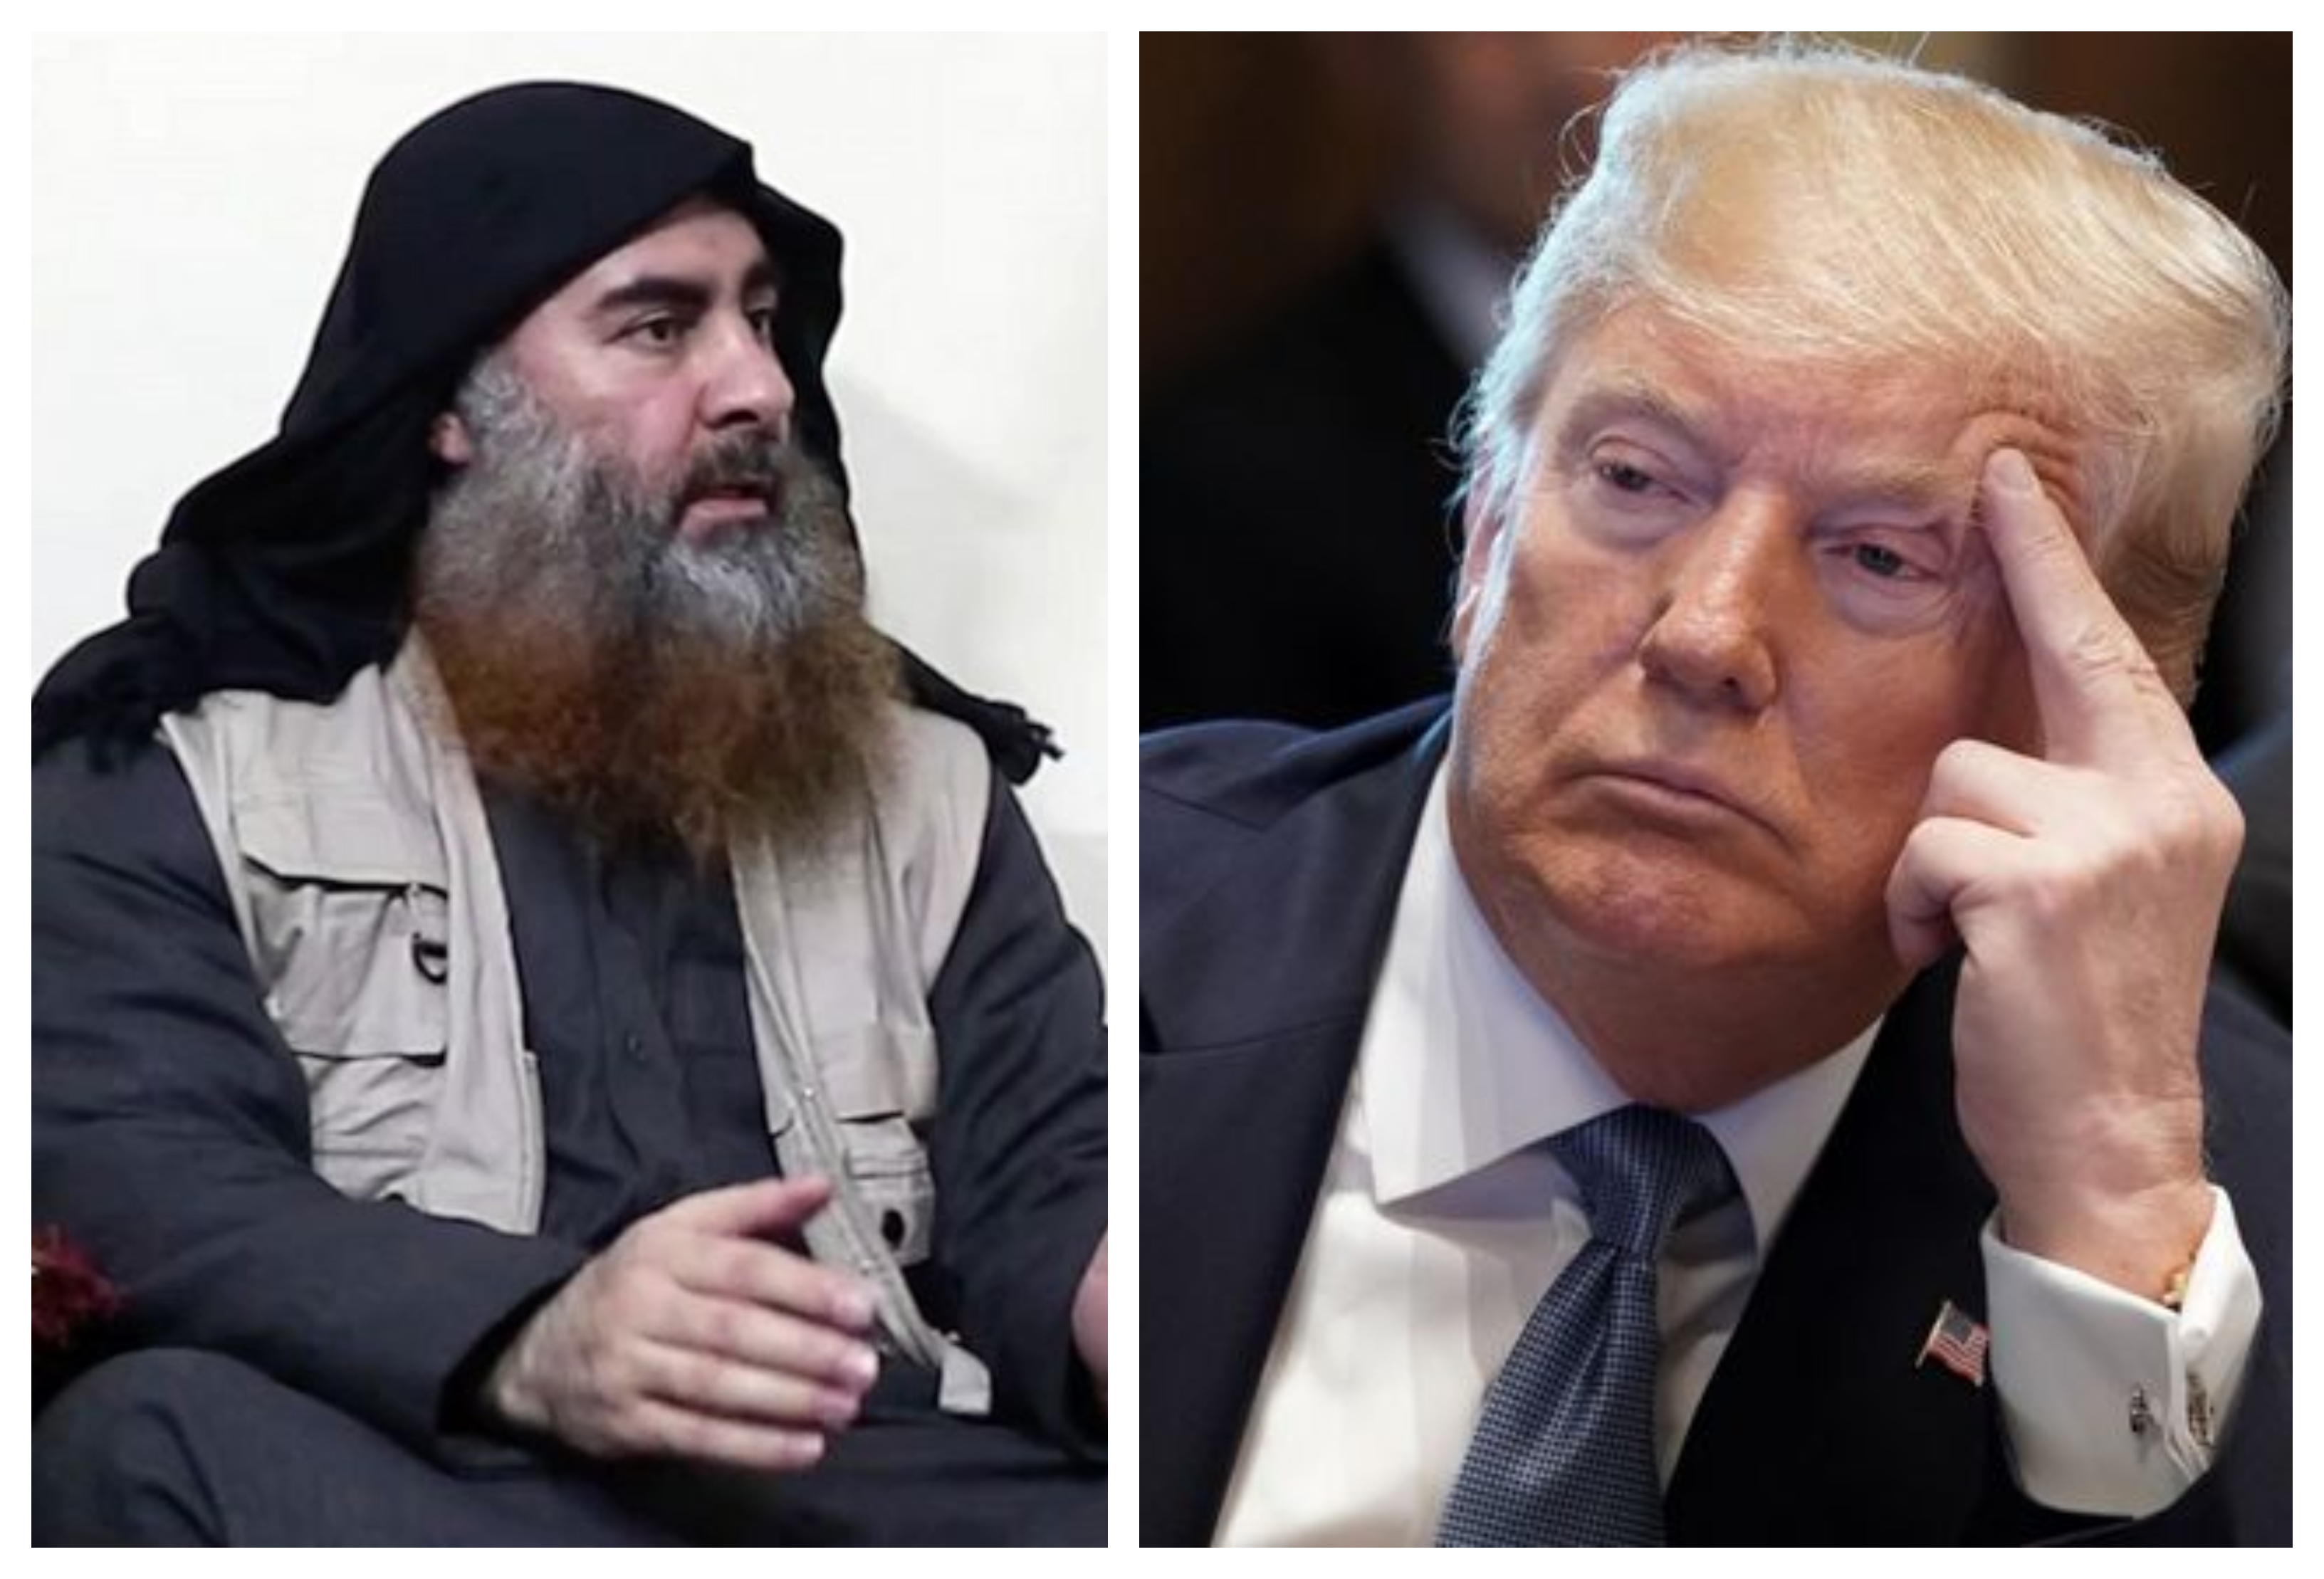 Trump tweets about something big, reports say ISIS chief killed self